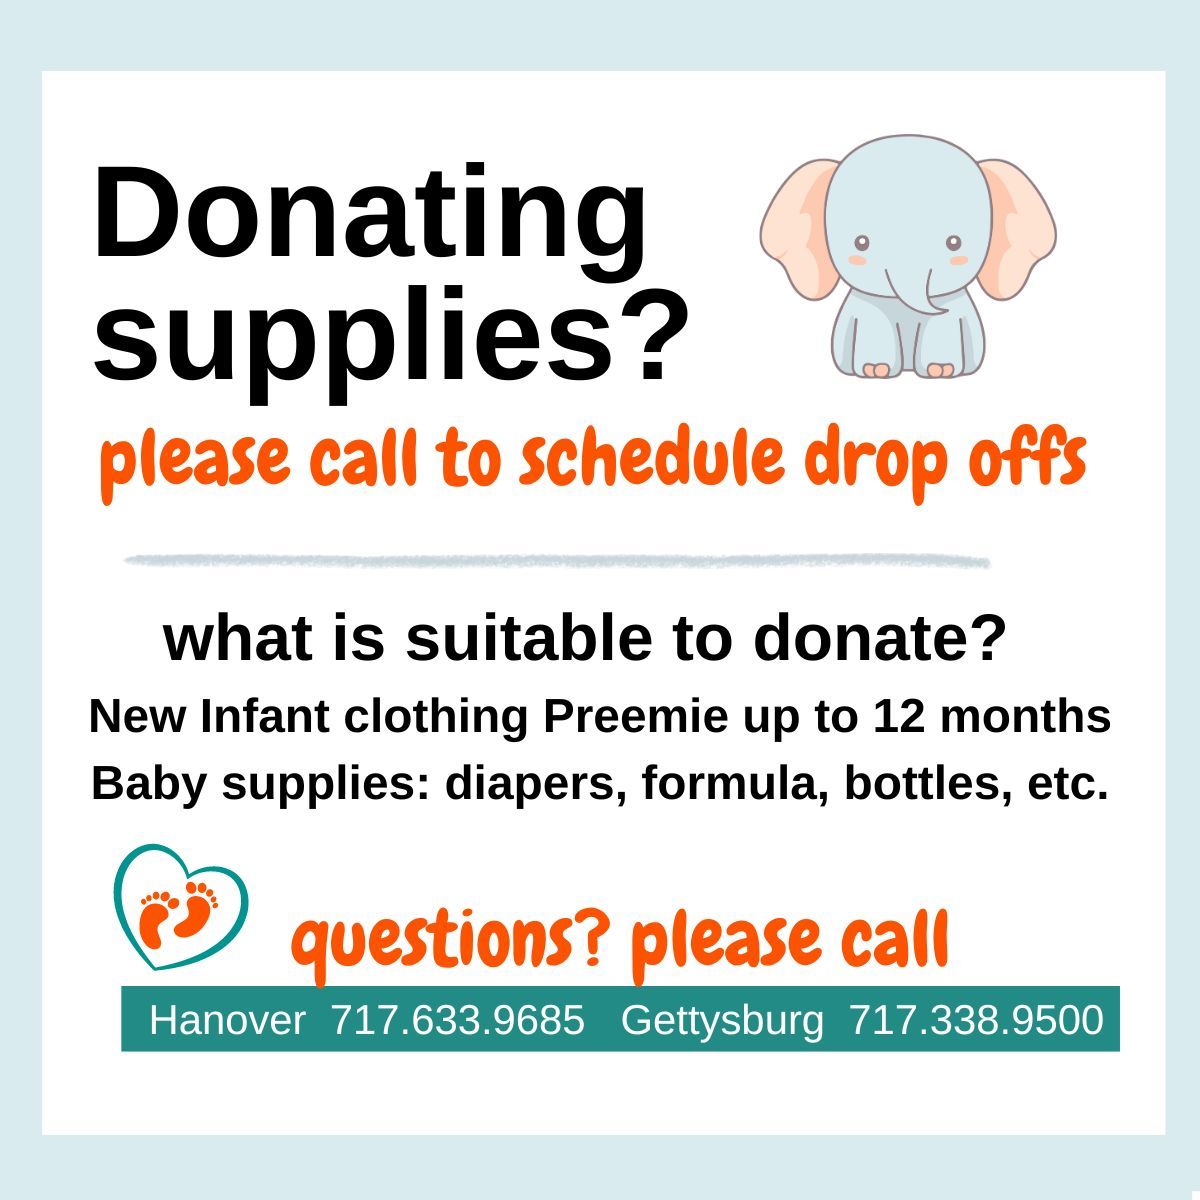 Thank you for your kind consideration of donating to us!Current needs:new baby essentials such as clothing (preemie to 12 months), diapers, wipes, formula, & more. We only accept new items to ensure the best for our clients.Your gifts make a difference! #donate #babyessentials